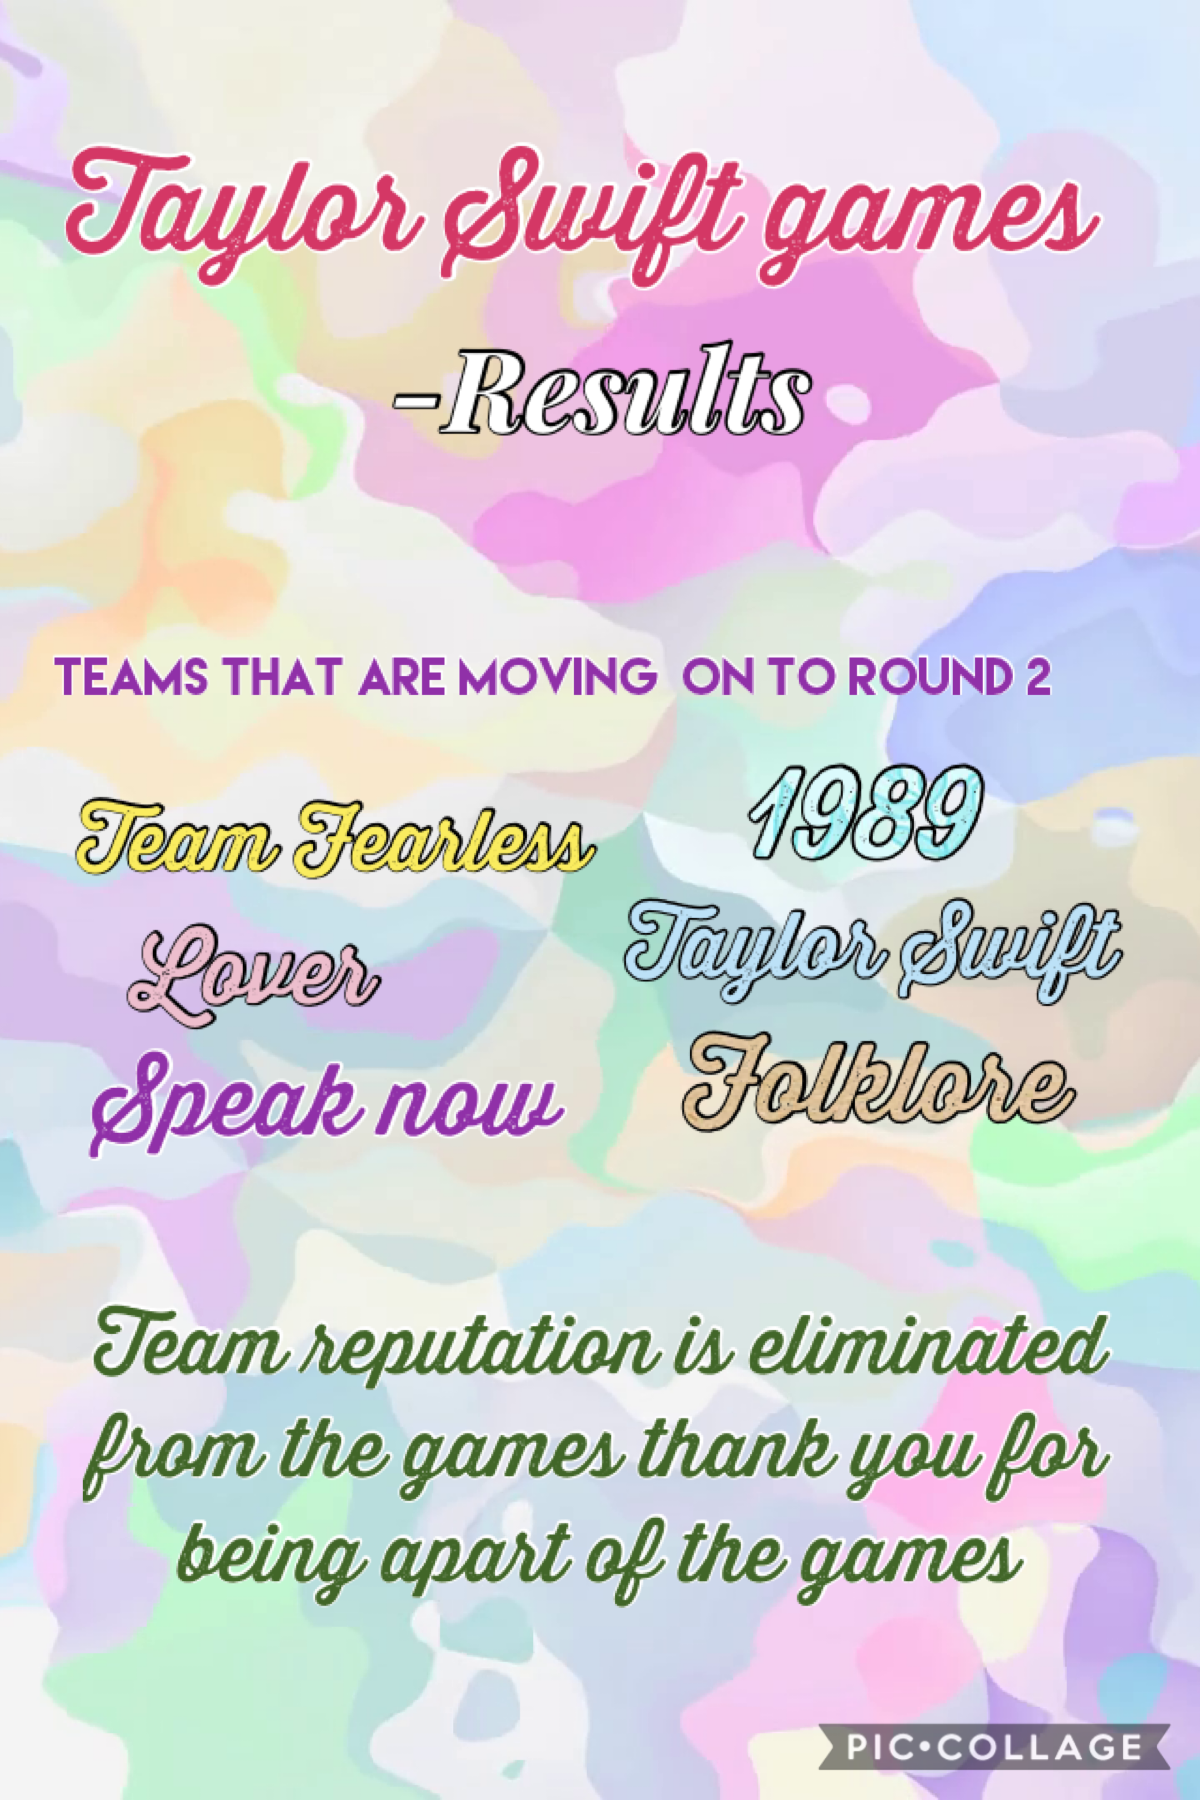 Taylor swift games results for round 1